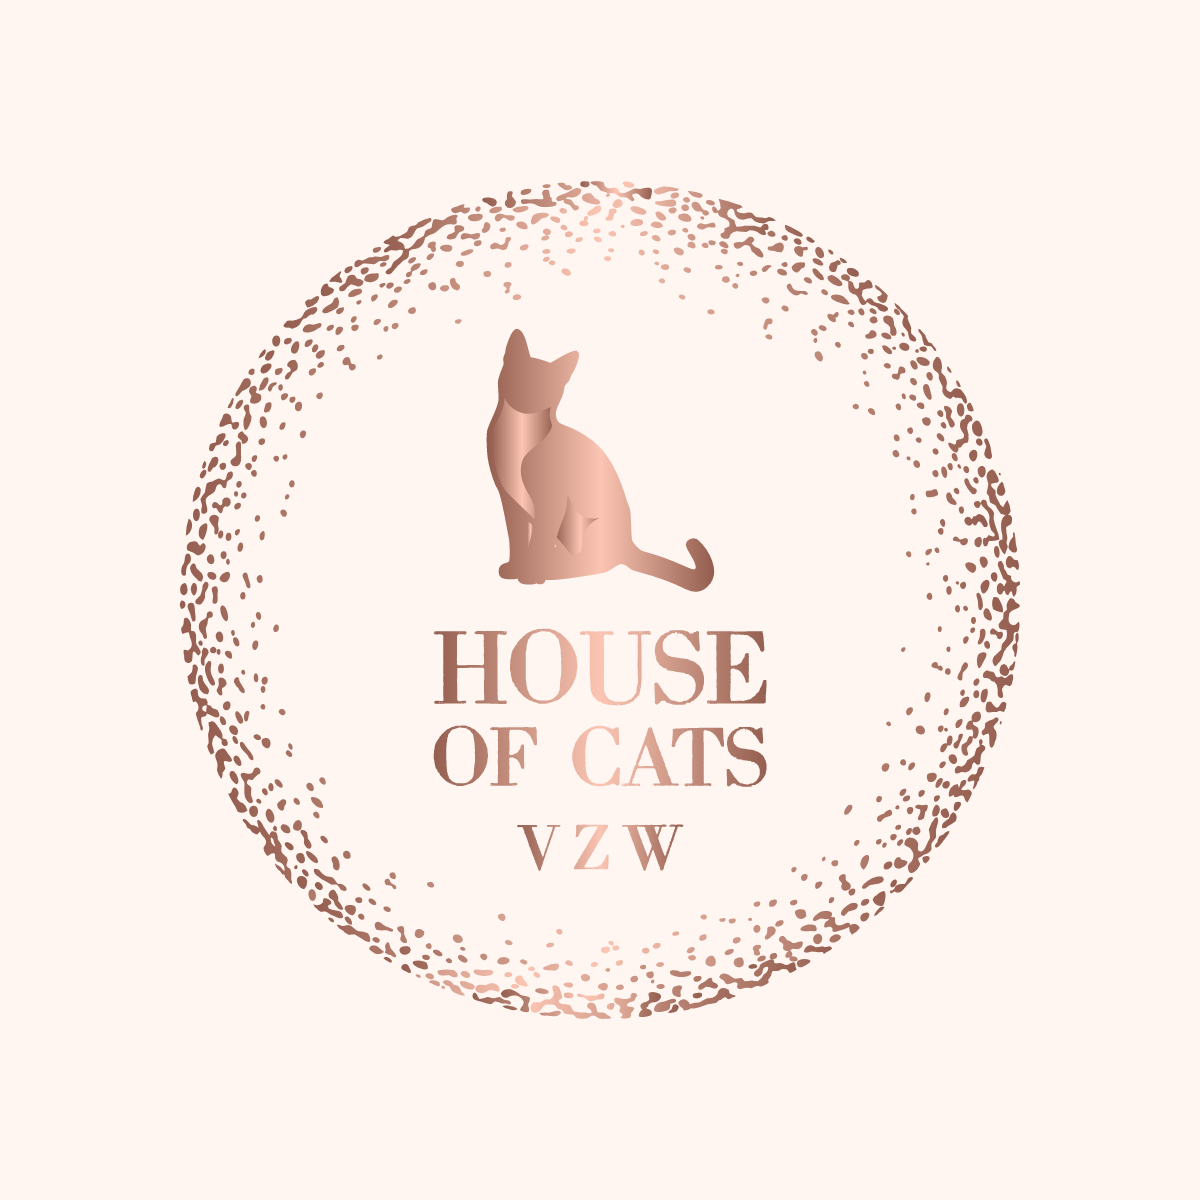 Vzw House of Cats